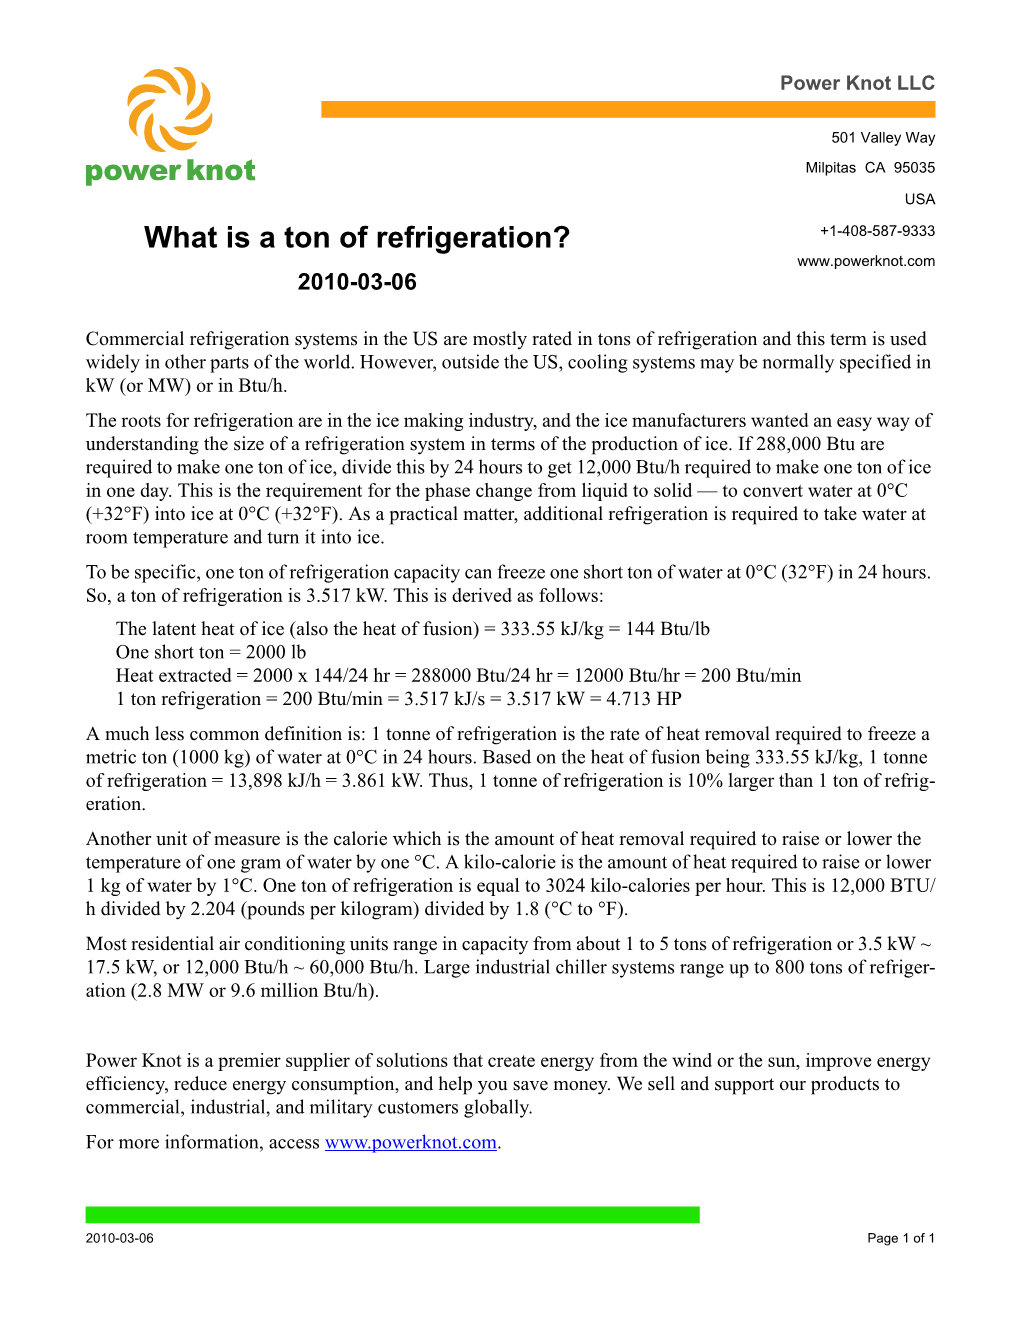 [ -- Power Knot LLC. What Is a Ton of Refrigeration?. 2010-03-06 -- ]